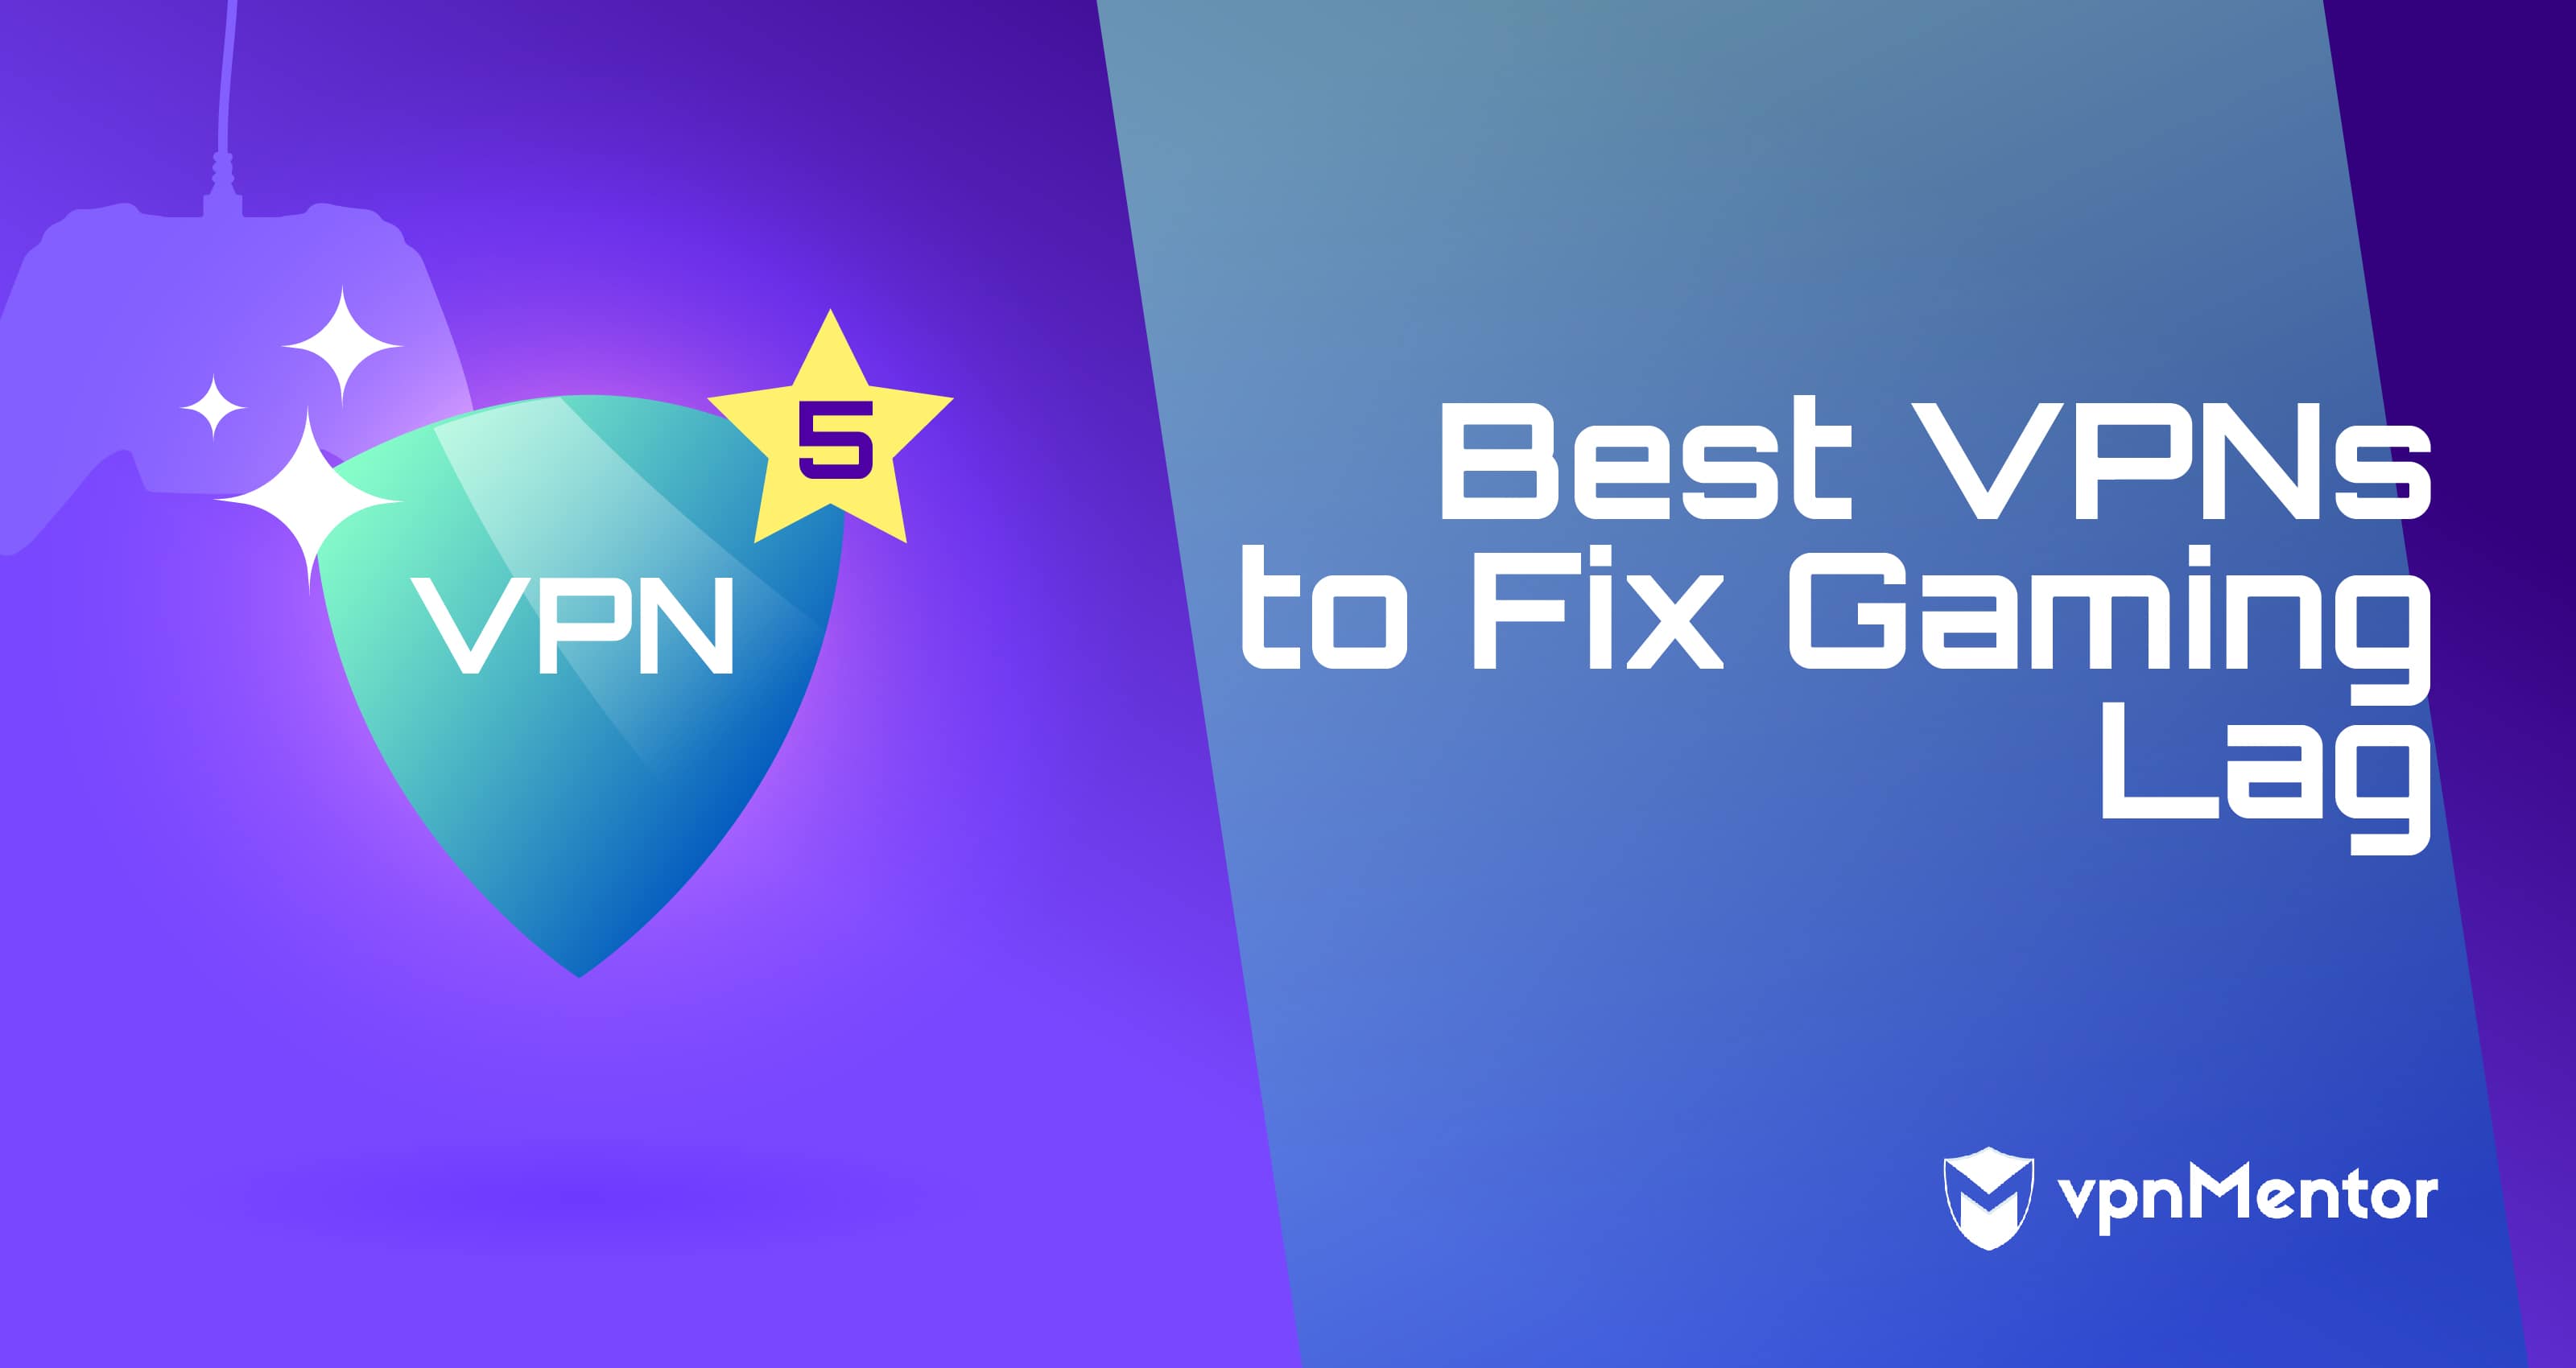 5 Best Vpn Apps To Fix Gaming Lags In 2020 - roblox 1000 ping fix